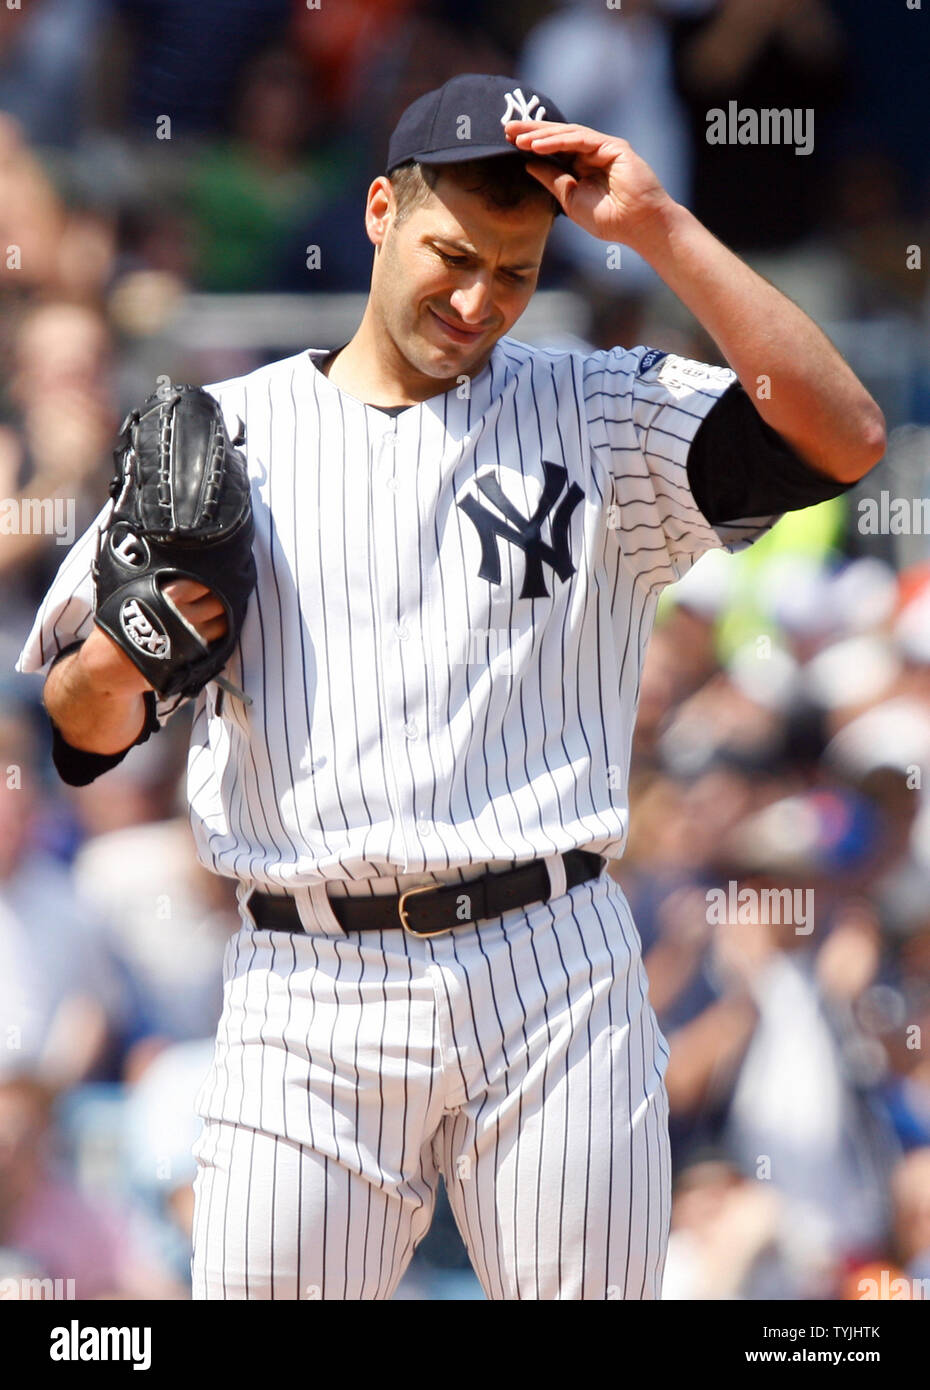 Andy Pettitte throws first pitch before Yankees' game vs. Mets